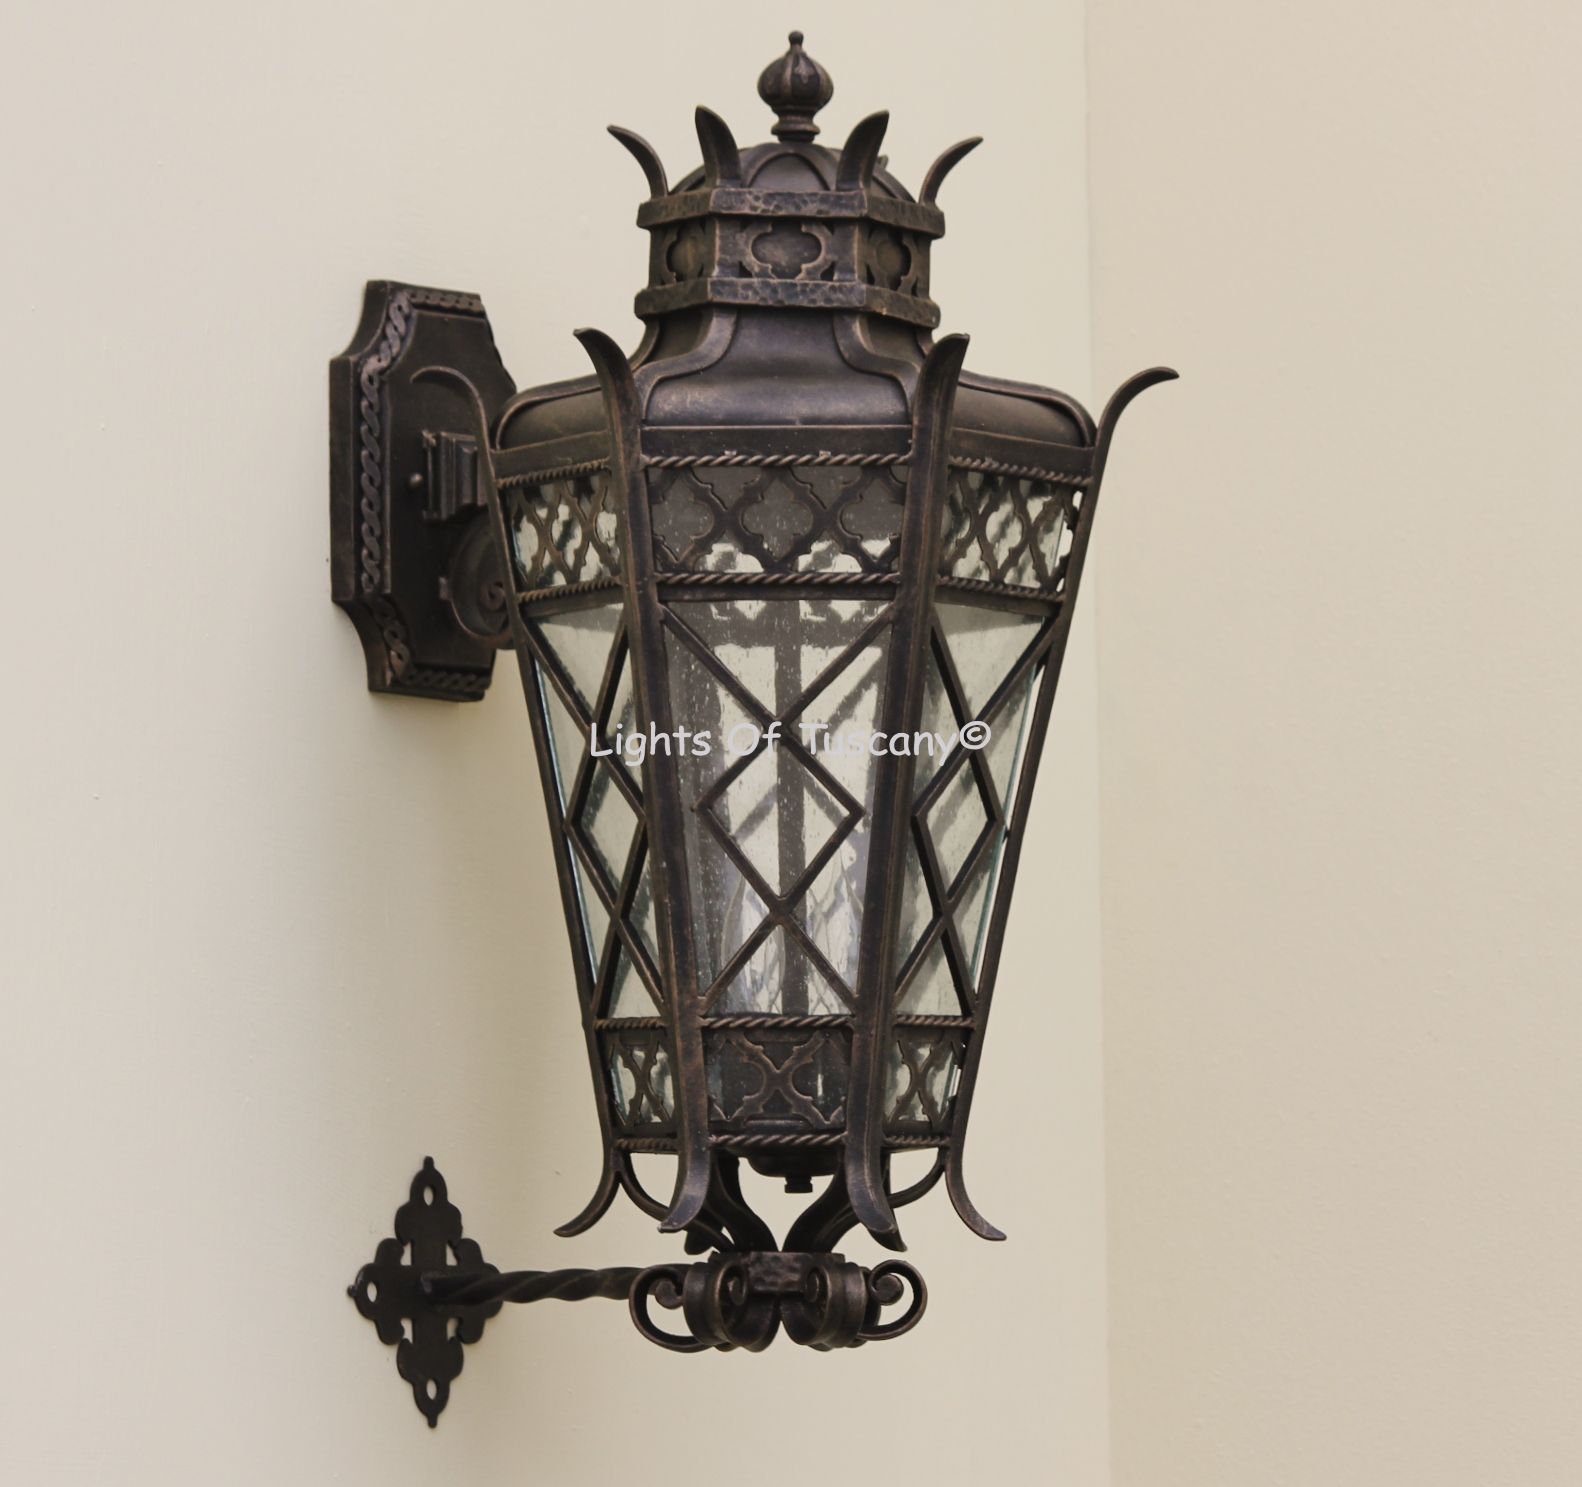 7181-3 Lights Outdoor of - Wall Light Mediterranean Tuscan Style Tuscany